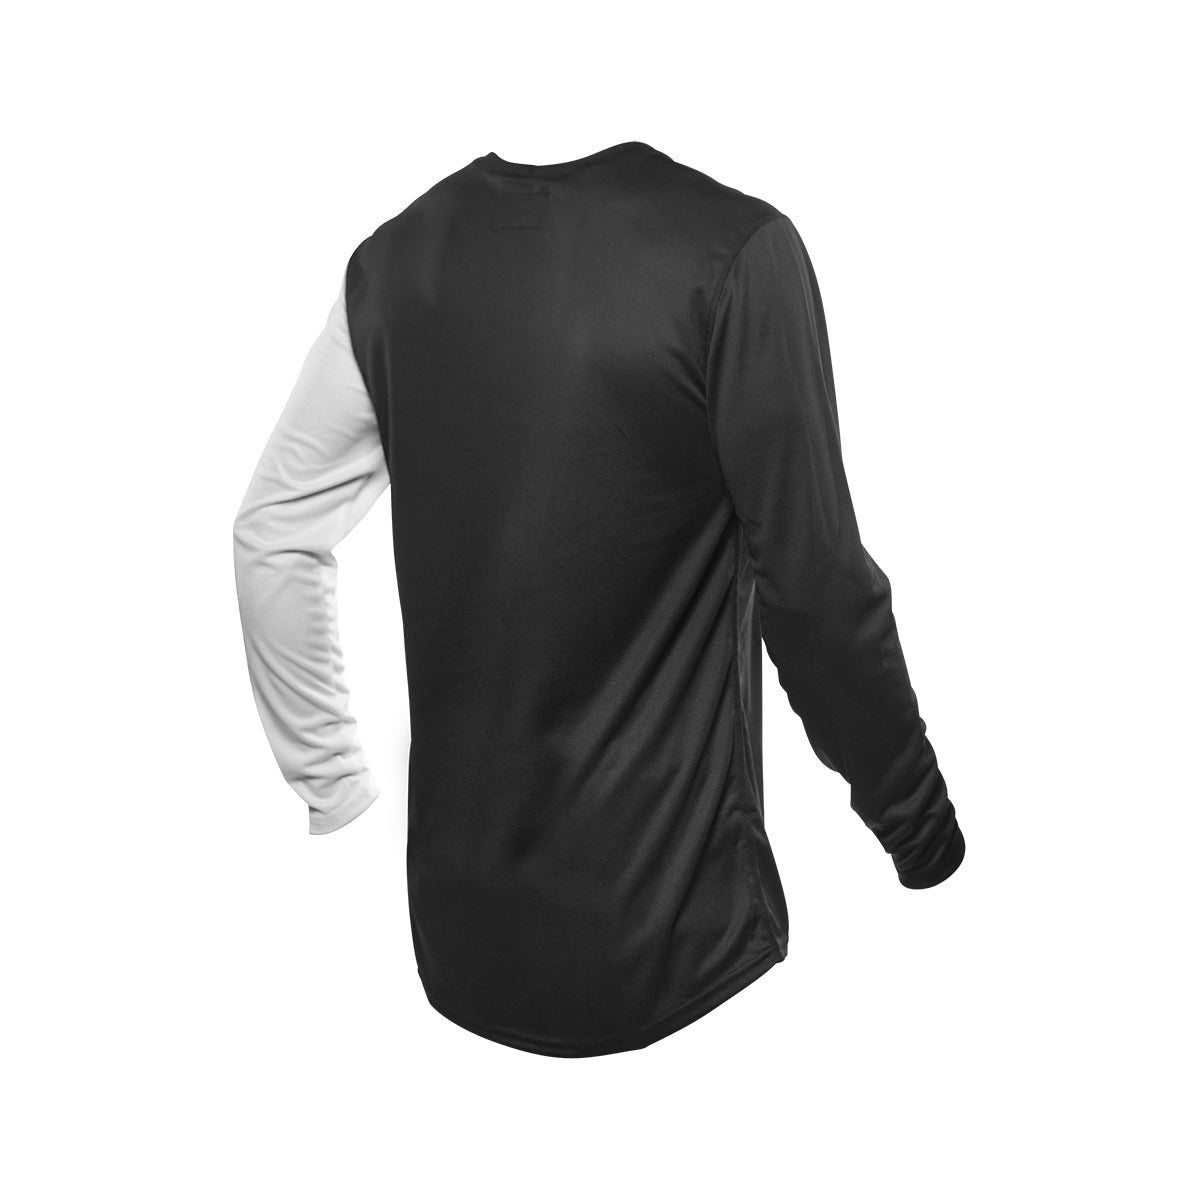 Carbon Youth Jersey - Black/White